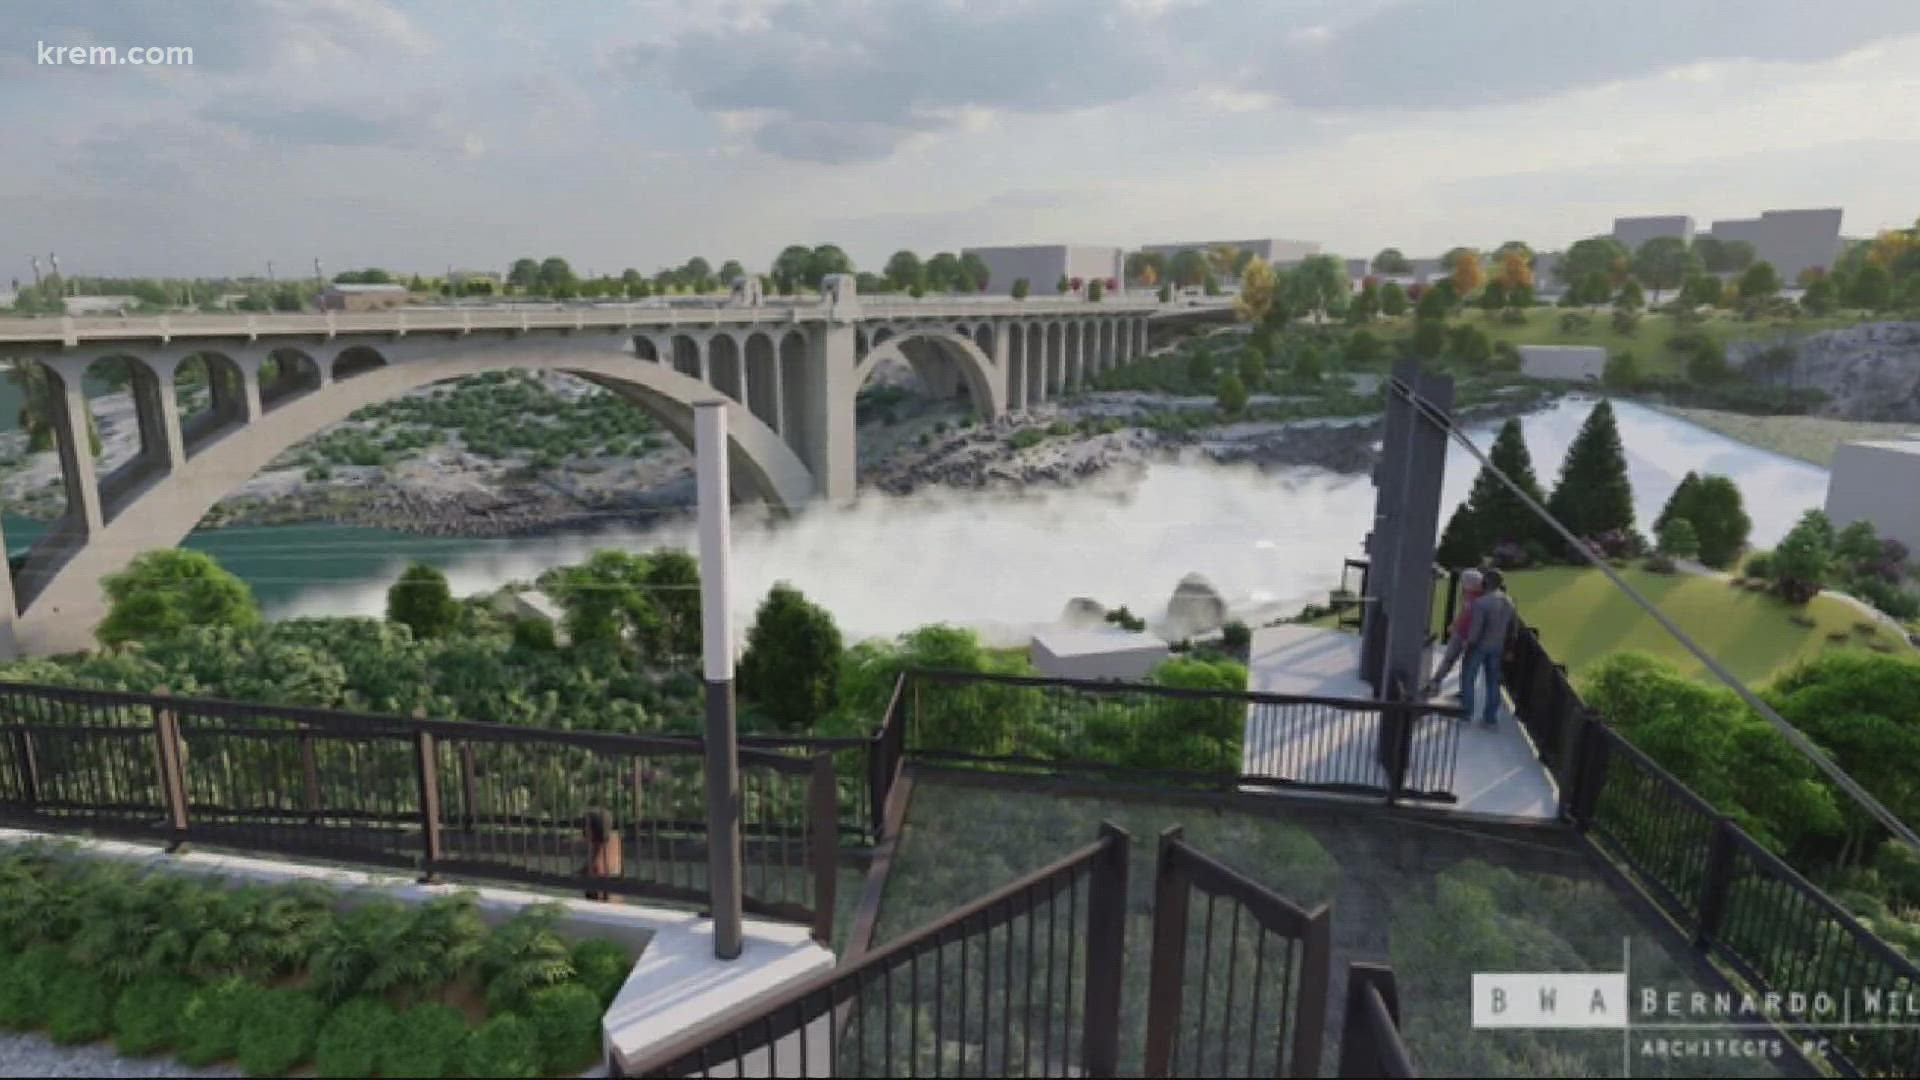 The 1,400 foot zipline would start near city hall and take thrill seekers from under the Monroe Street Bridge all the way down to Peaceful Valley.